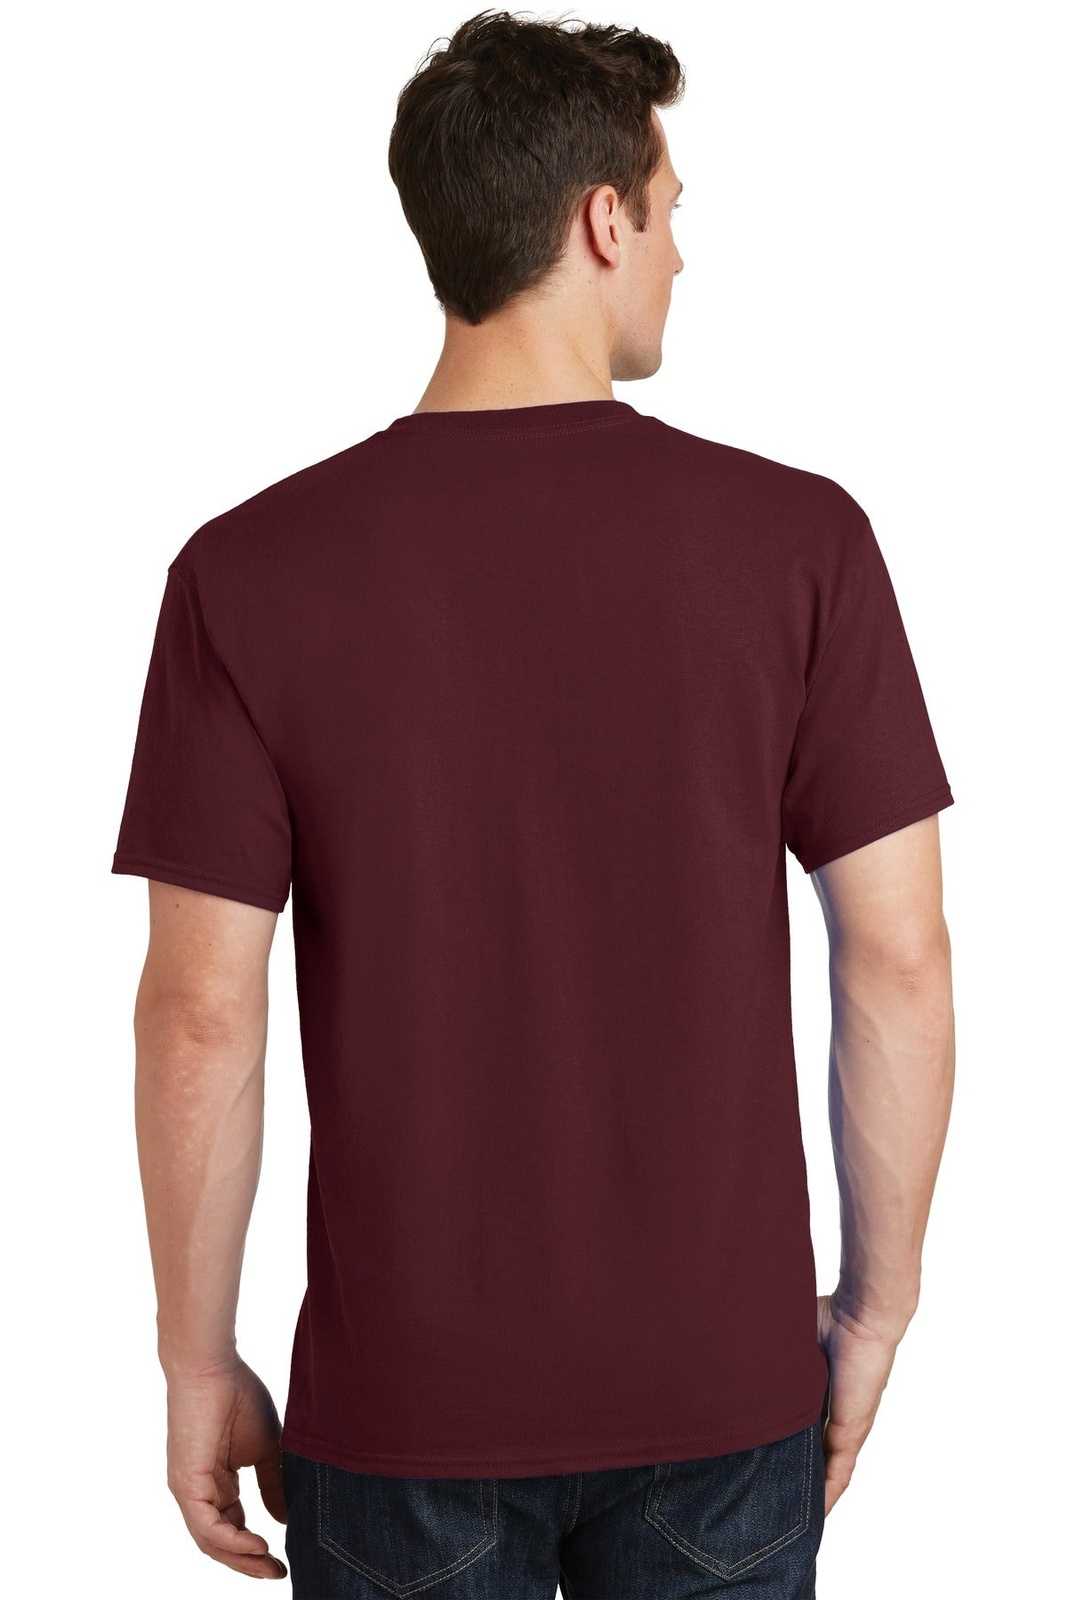 Port & Company PC54T Tall Core Cotton Tee - Athletic Maroon - HIT a Double - 1